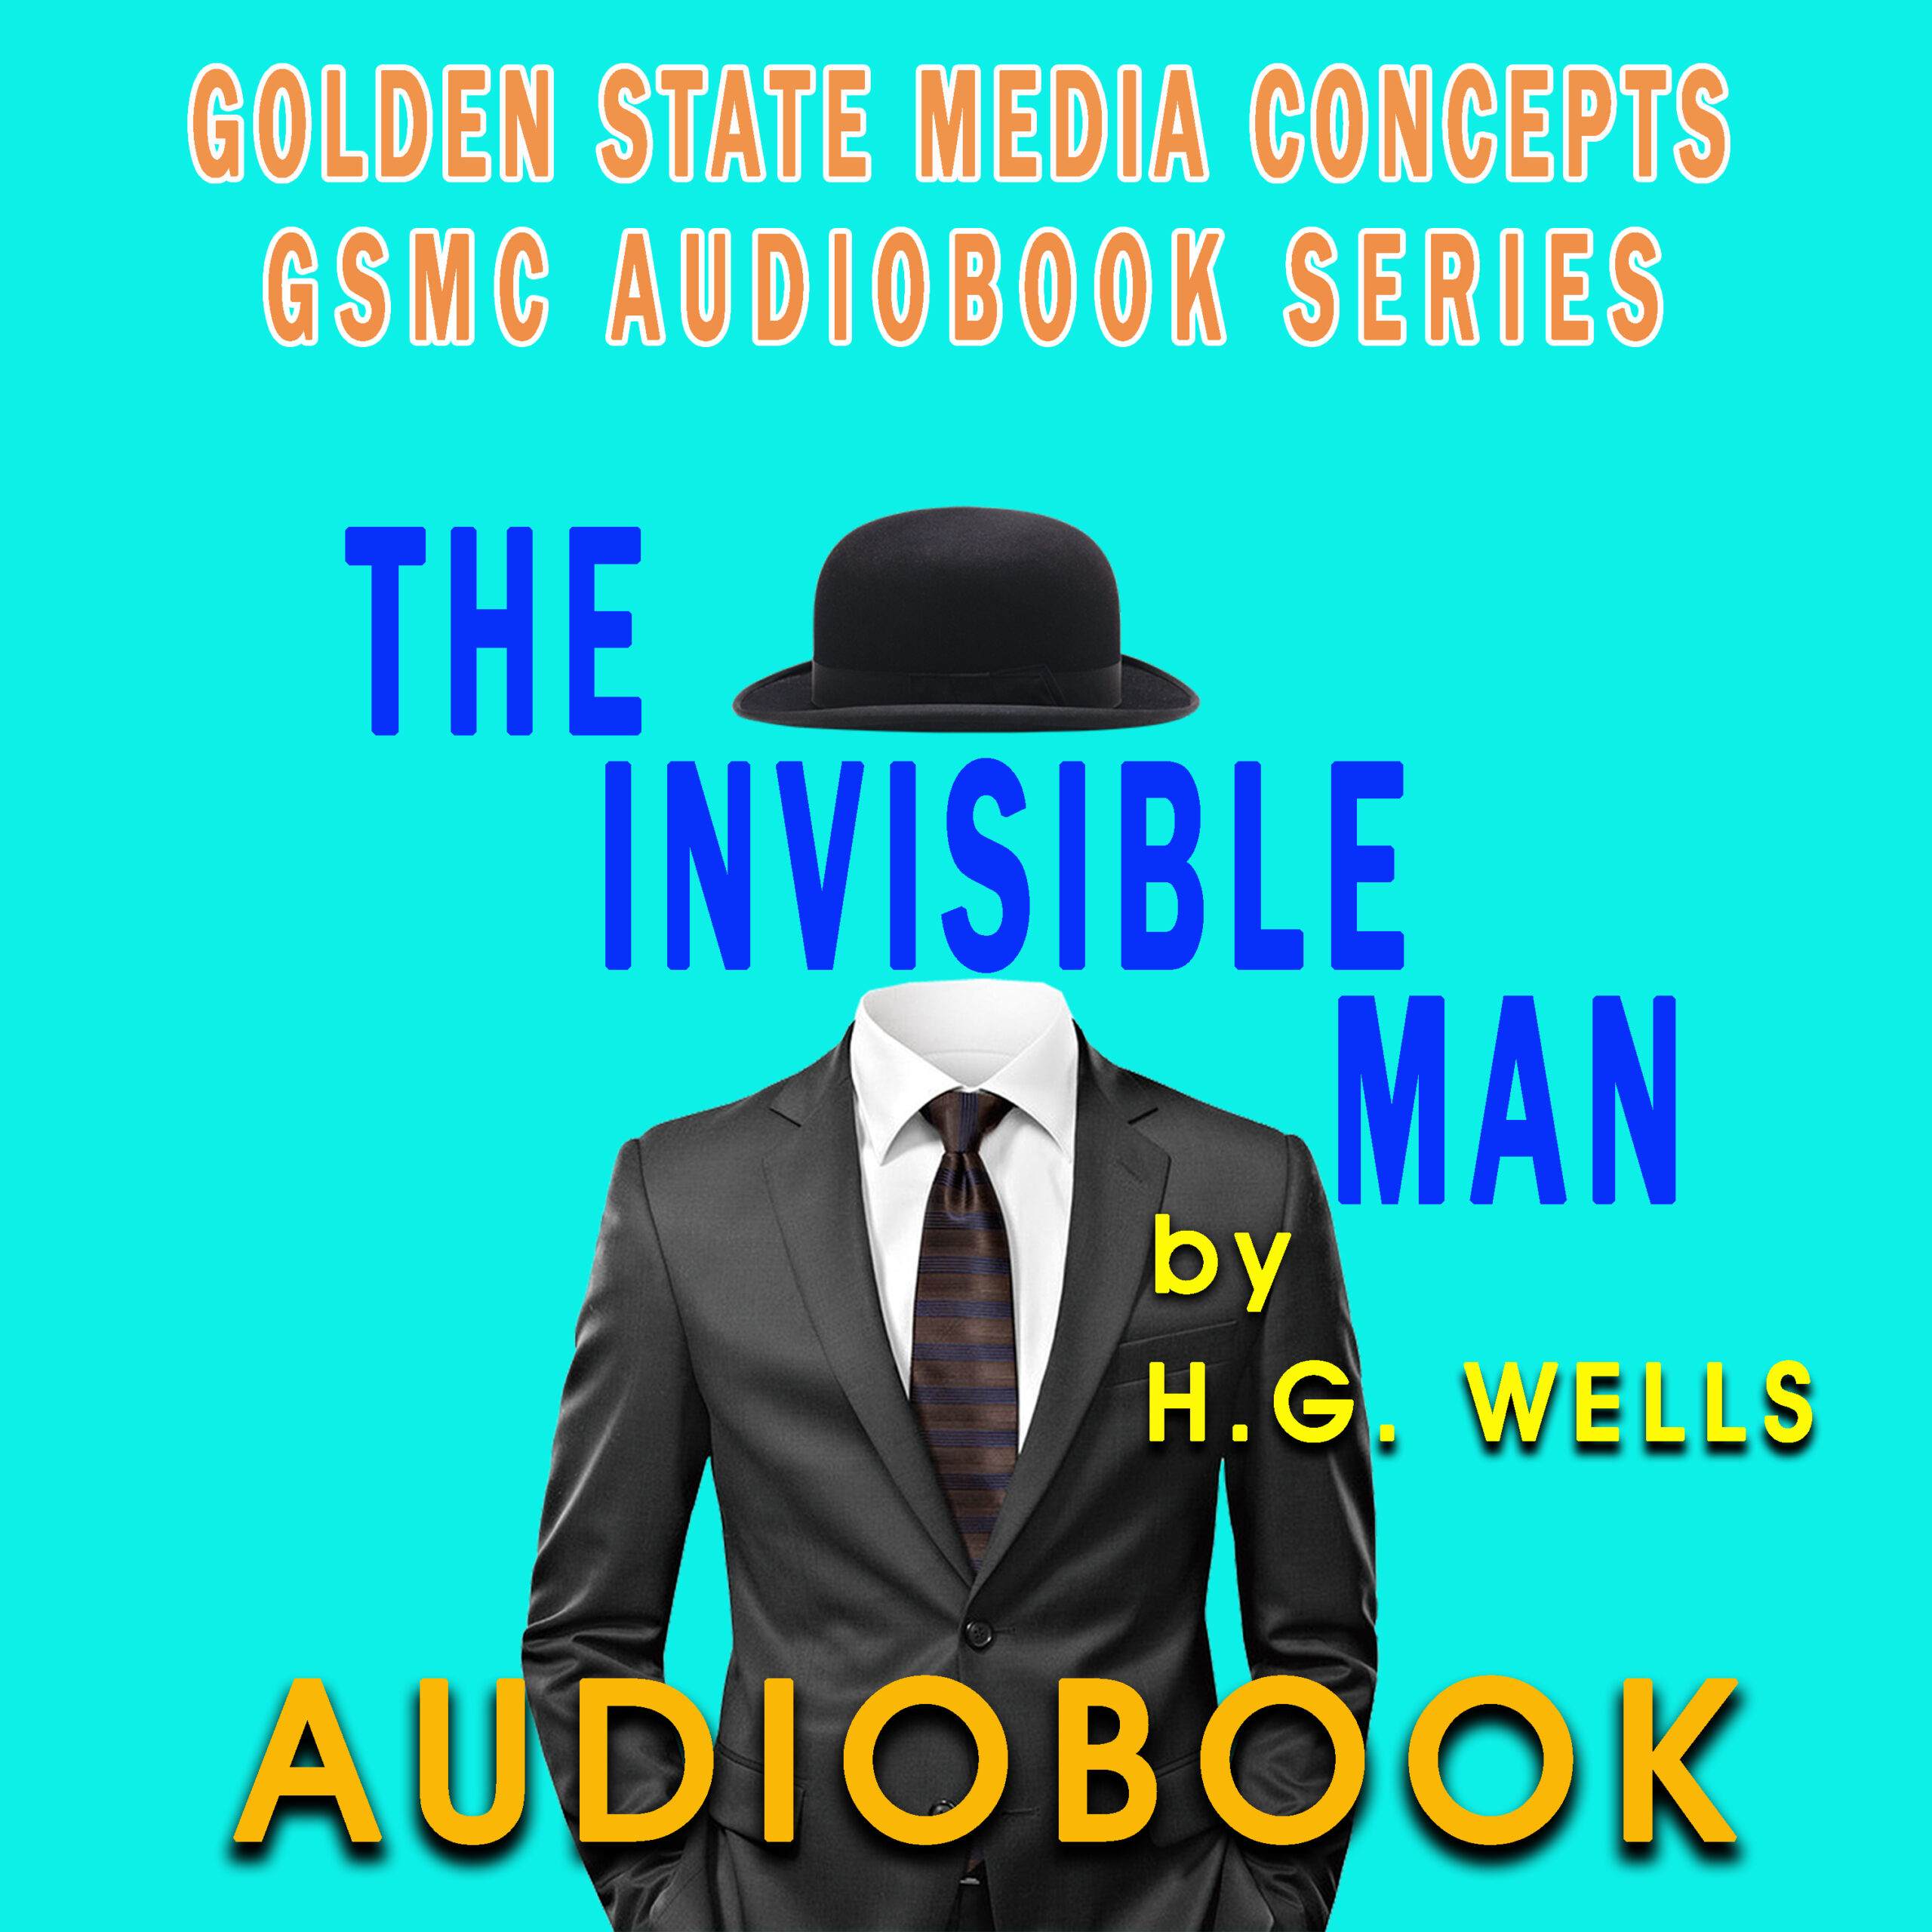 GSMC Audiobook Series: The Invisible Man by H.G. Wells